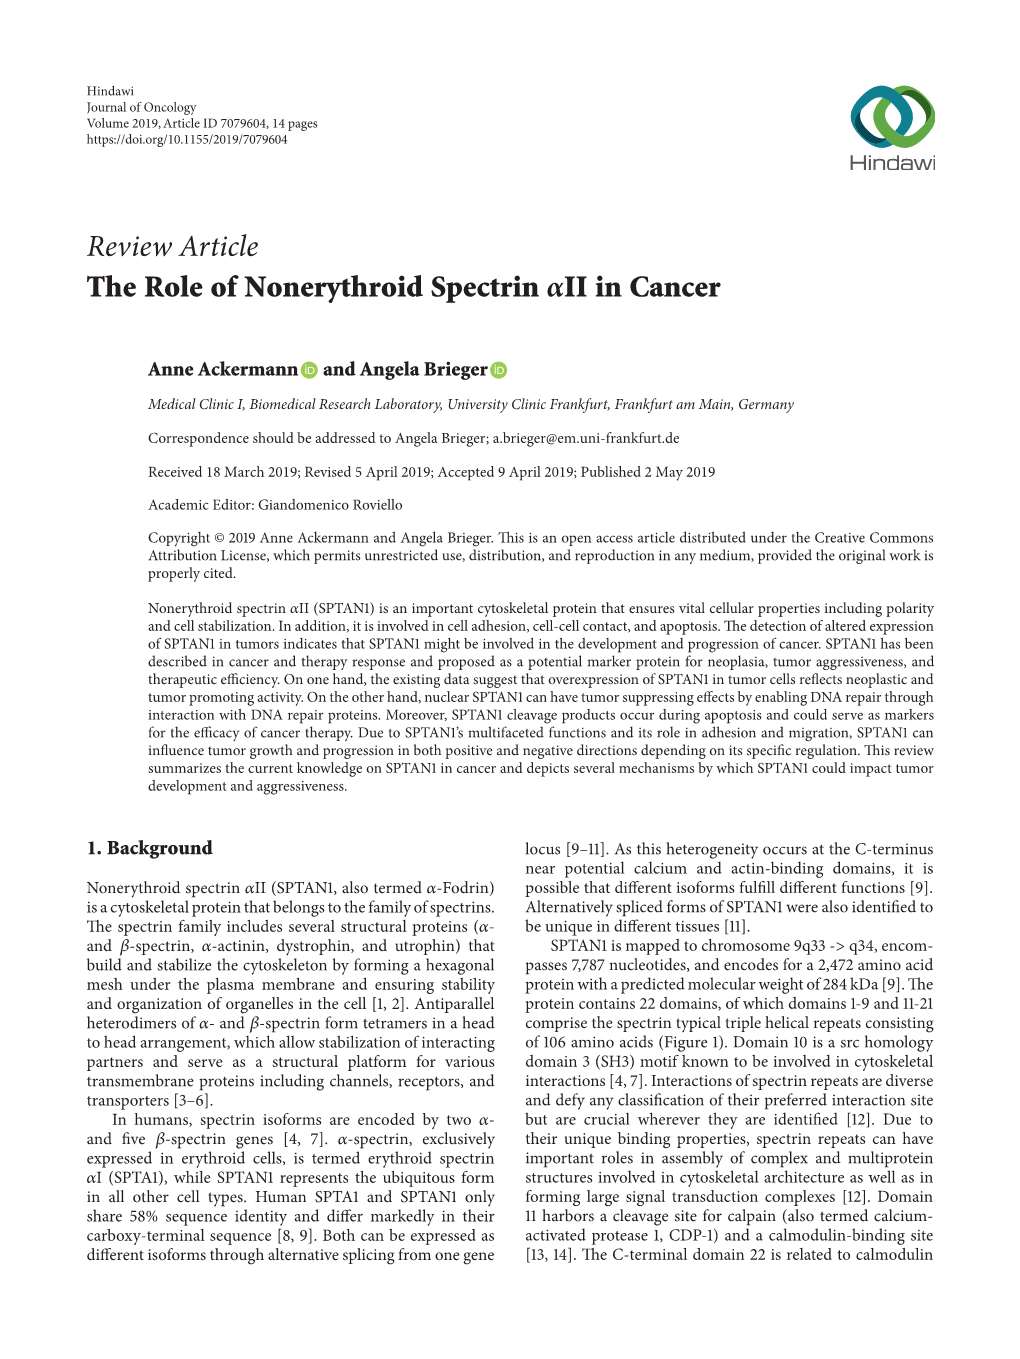 Review Article the Role of Nonerythroid Spectrin II in Cancer